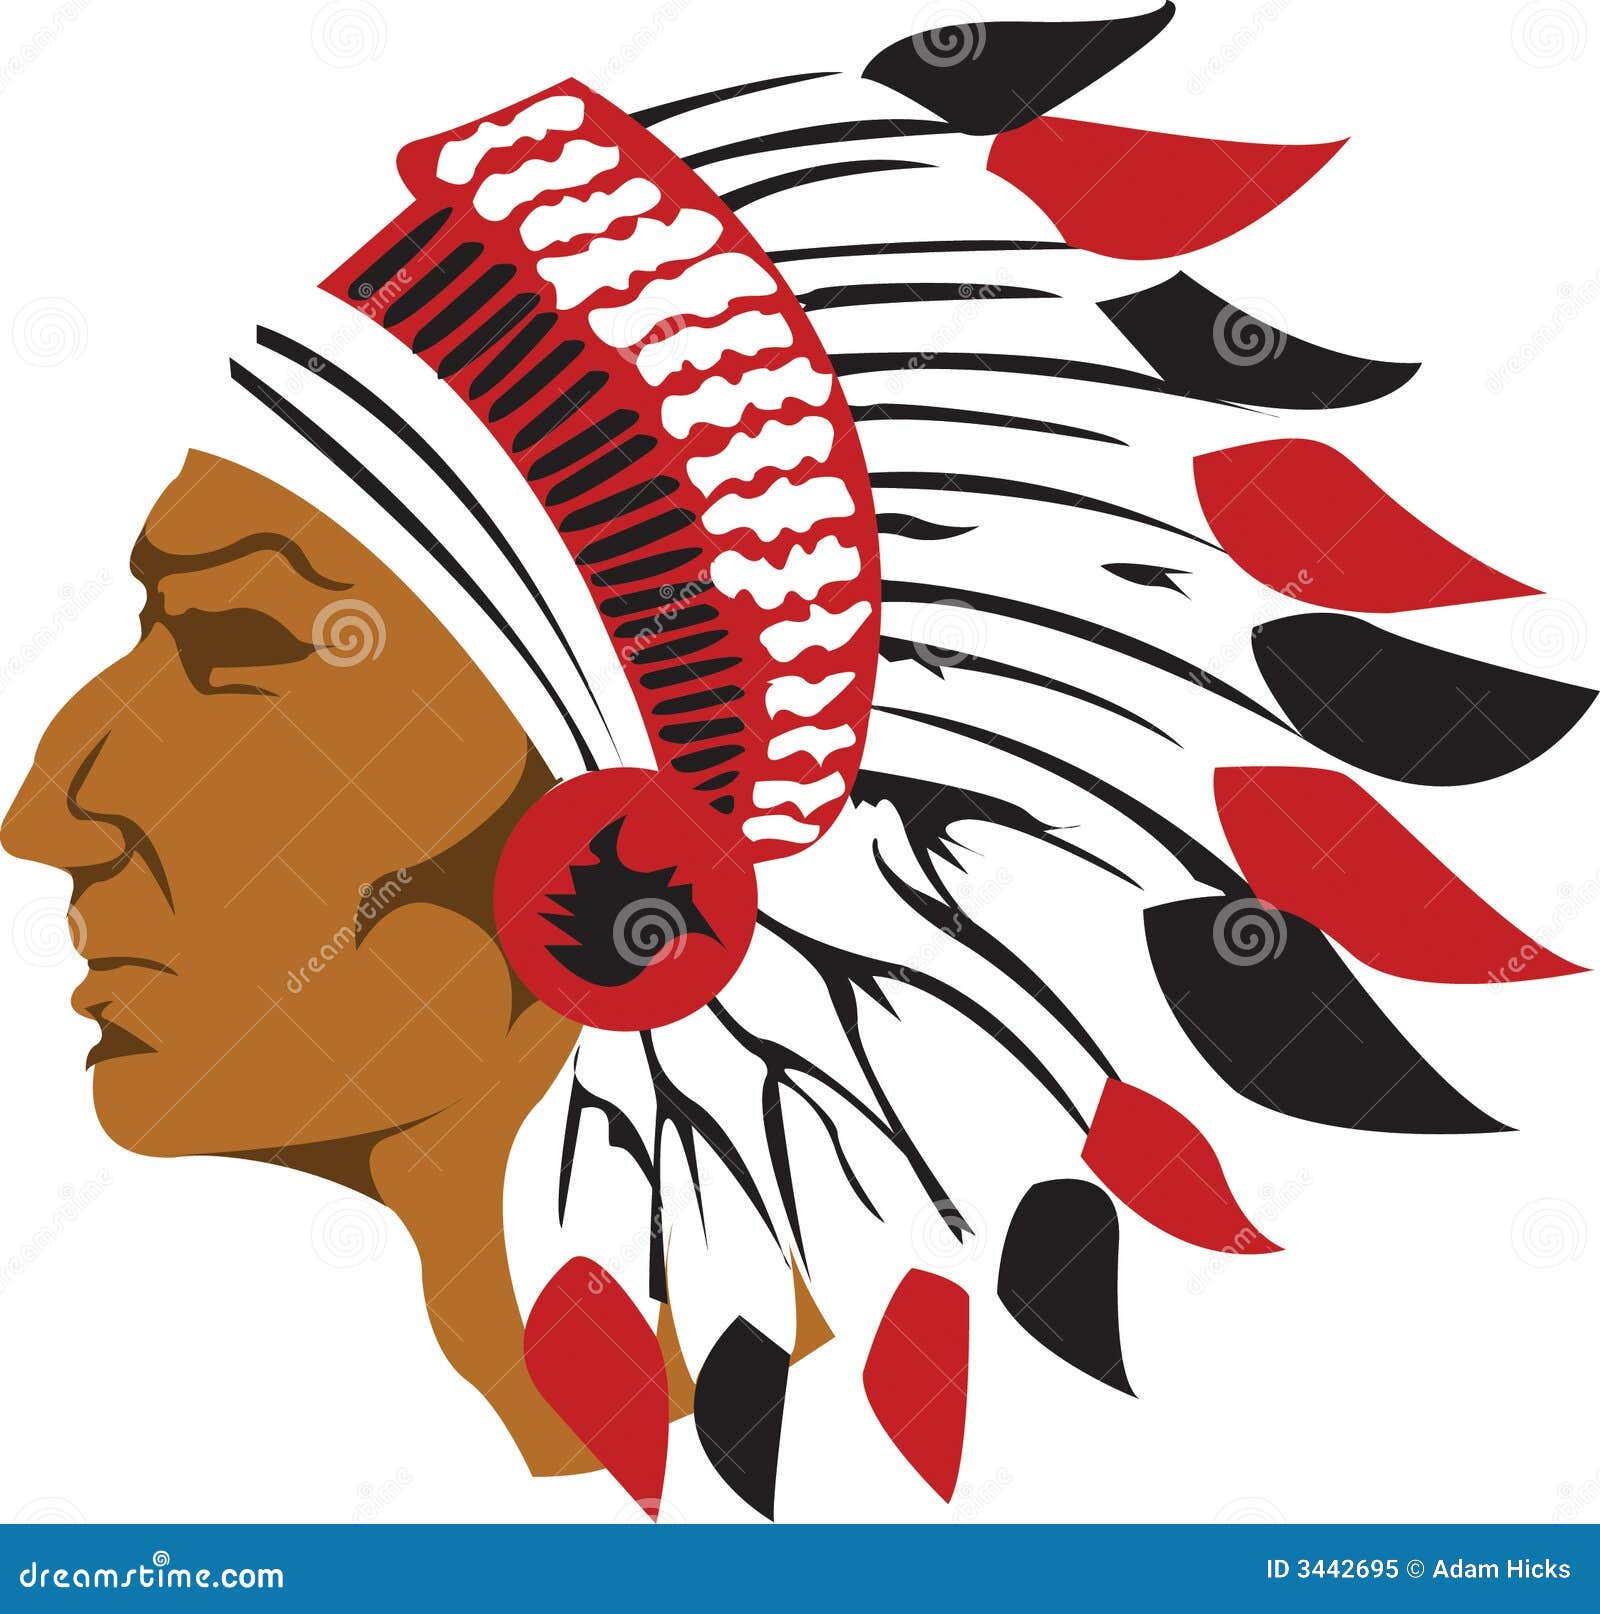 indian clipart gallery - photo #29